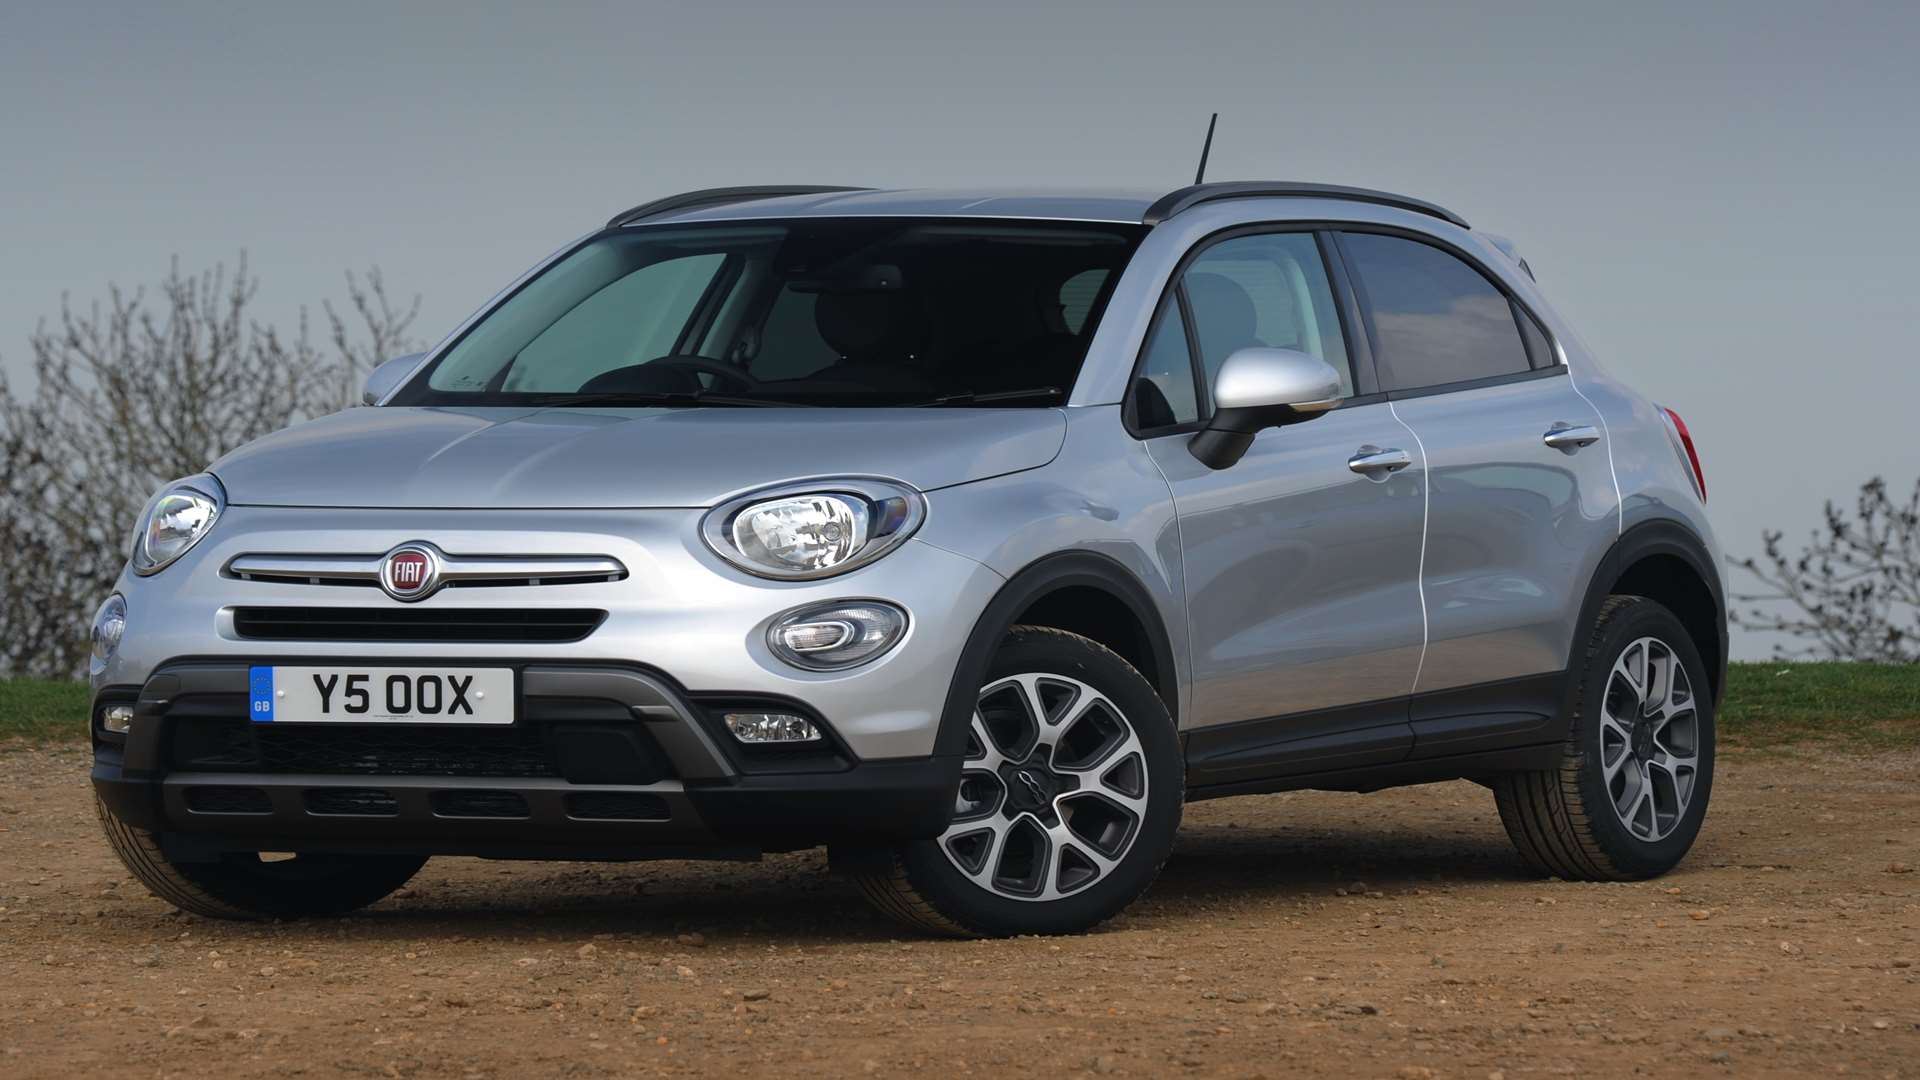 The 500X is Fiat's answer to the SUV-like Countryman